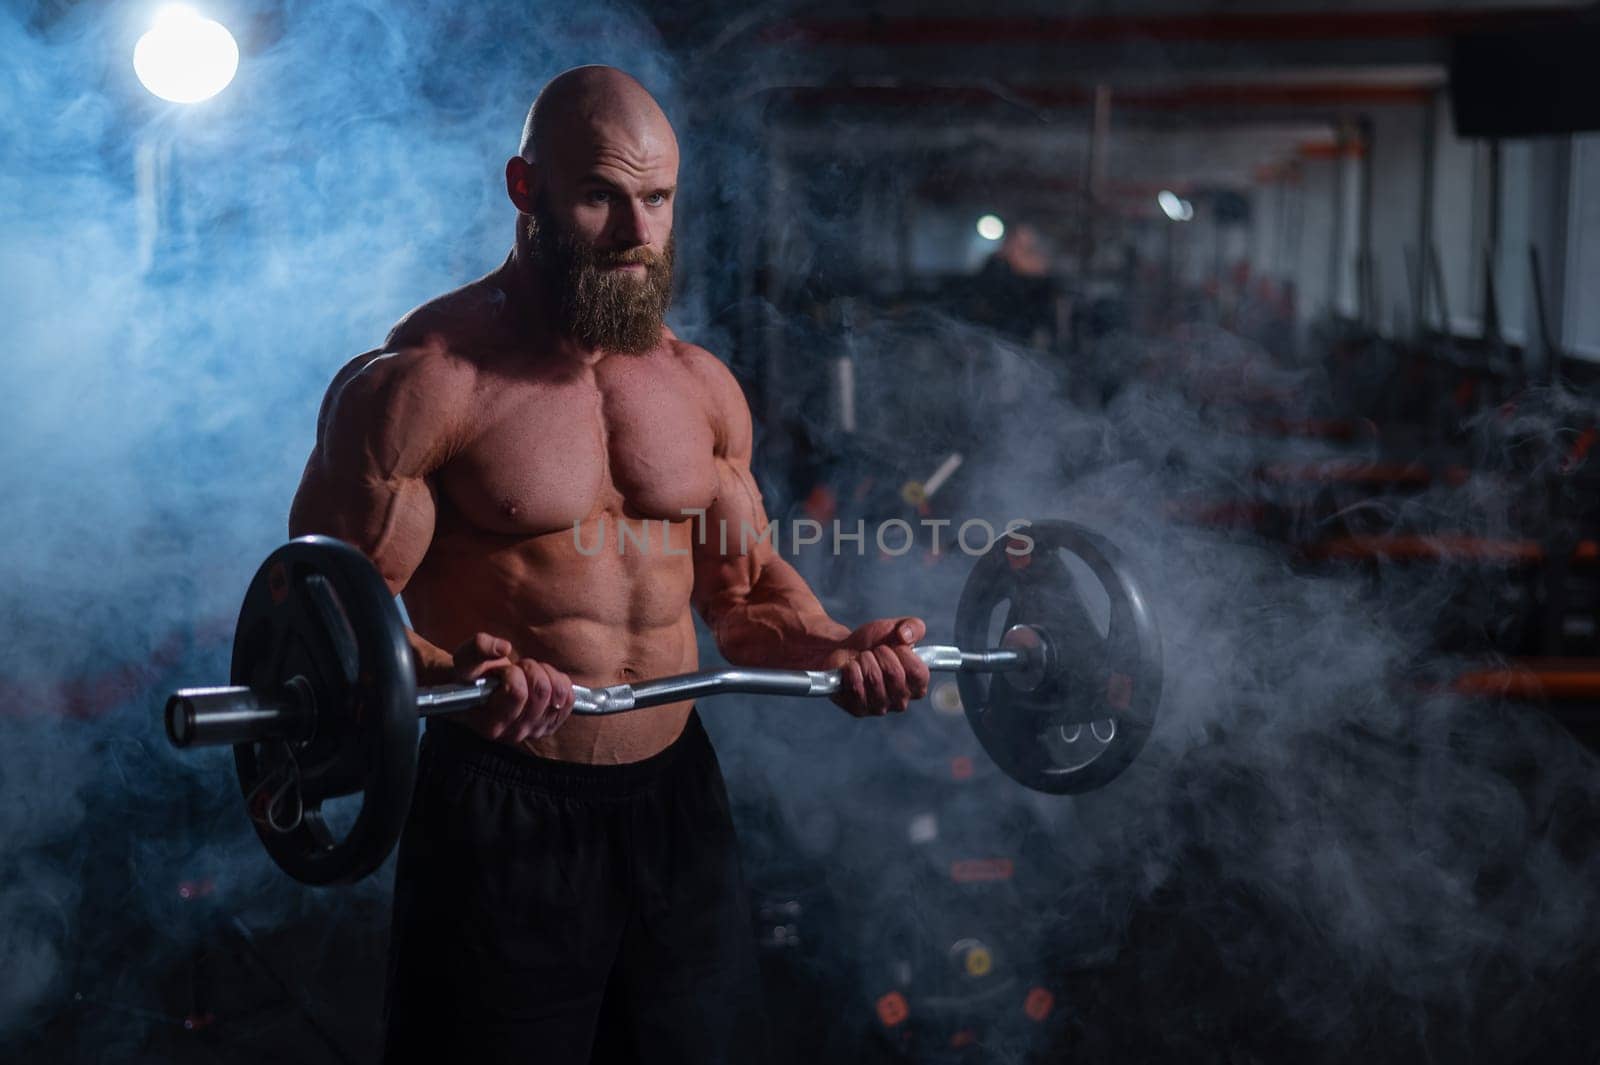 Caucasian bald topless man doing an exercise with a barbell in the gym. Bicep curls with weights. by mrwed54